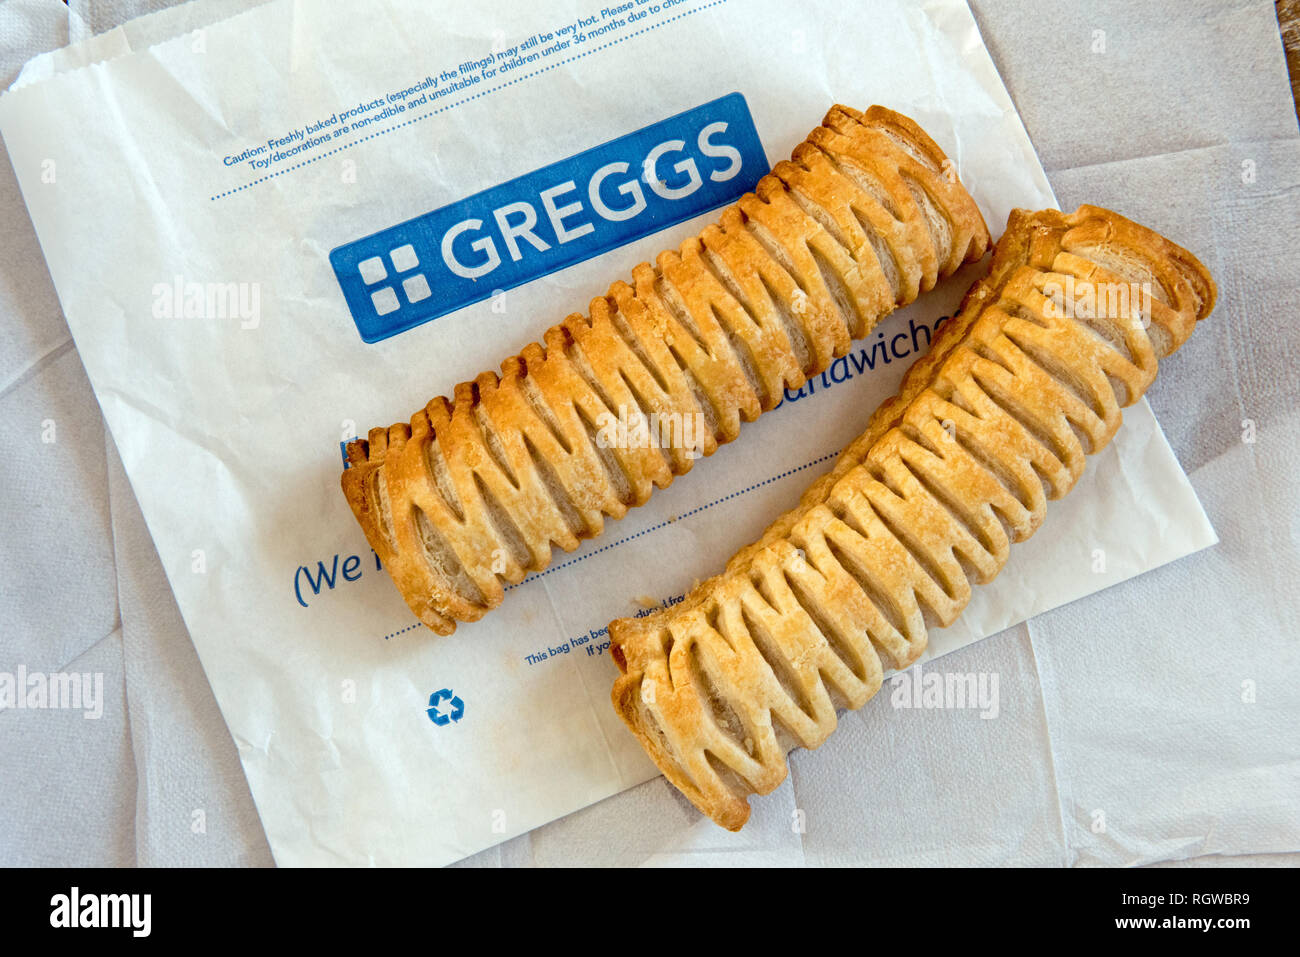 Greggs Sausage Rolls High Resolution Stock Photography and Images - Alamy